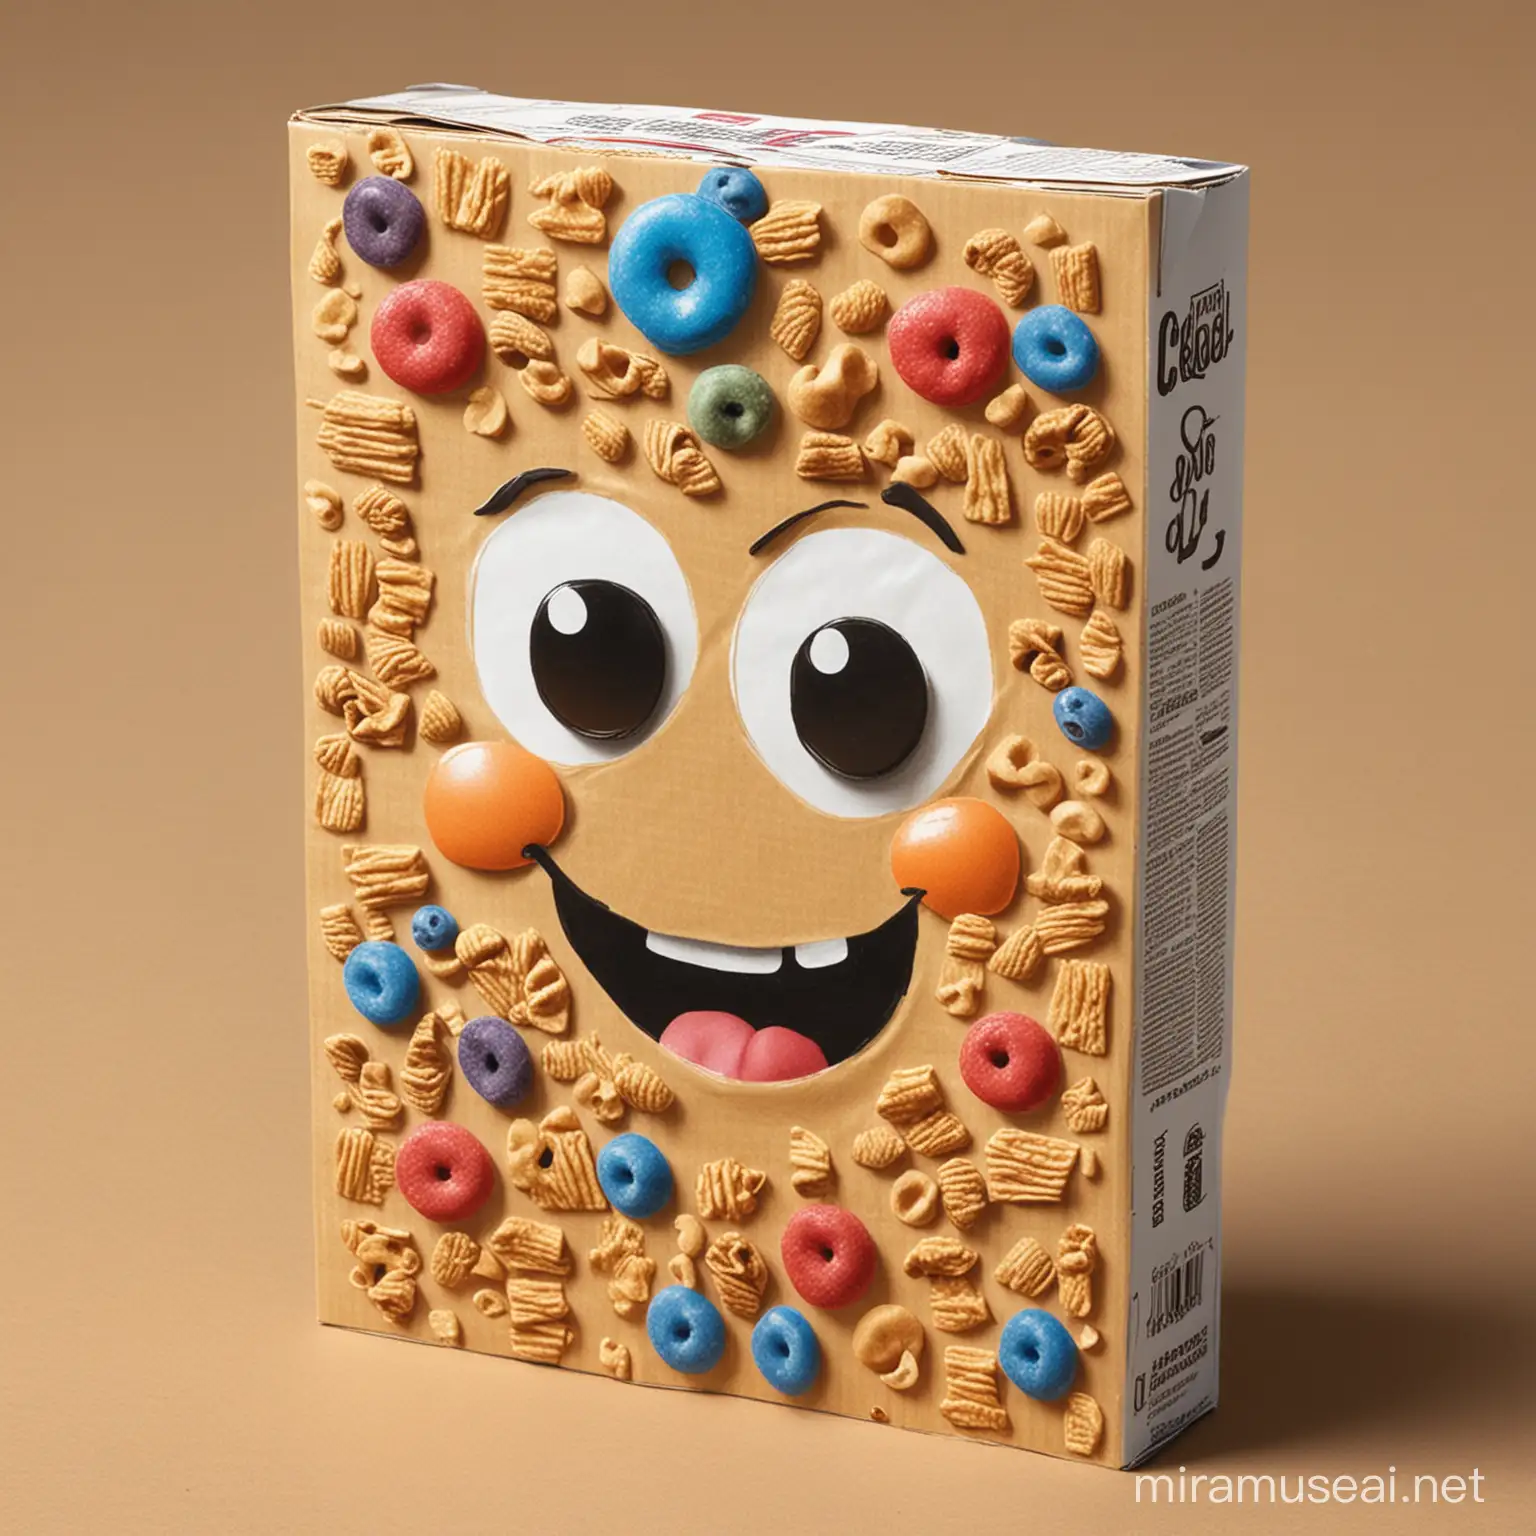 create a simple cover design for a cereal box that is original and creative for art class